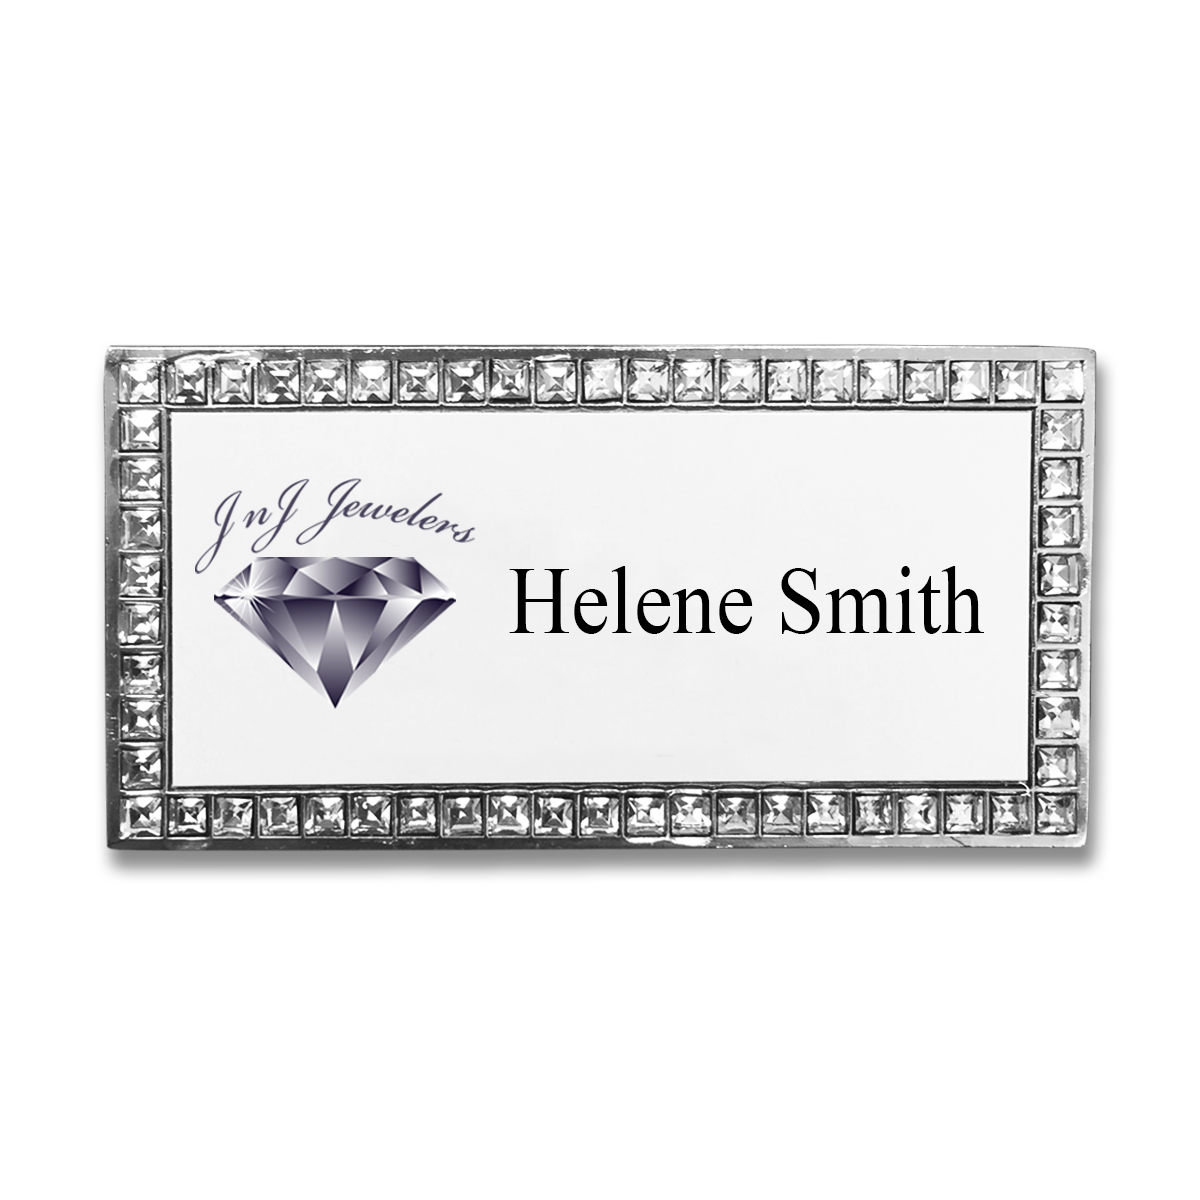 BLING CRYSTAL CUSTOM PERSONALIZED WITH YOUR LOGO NAME BADGE W/ PIN FASTENER 